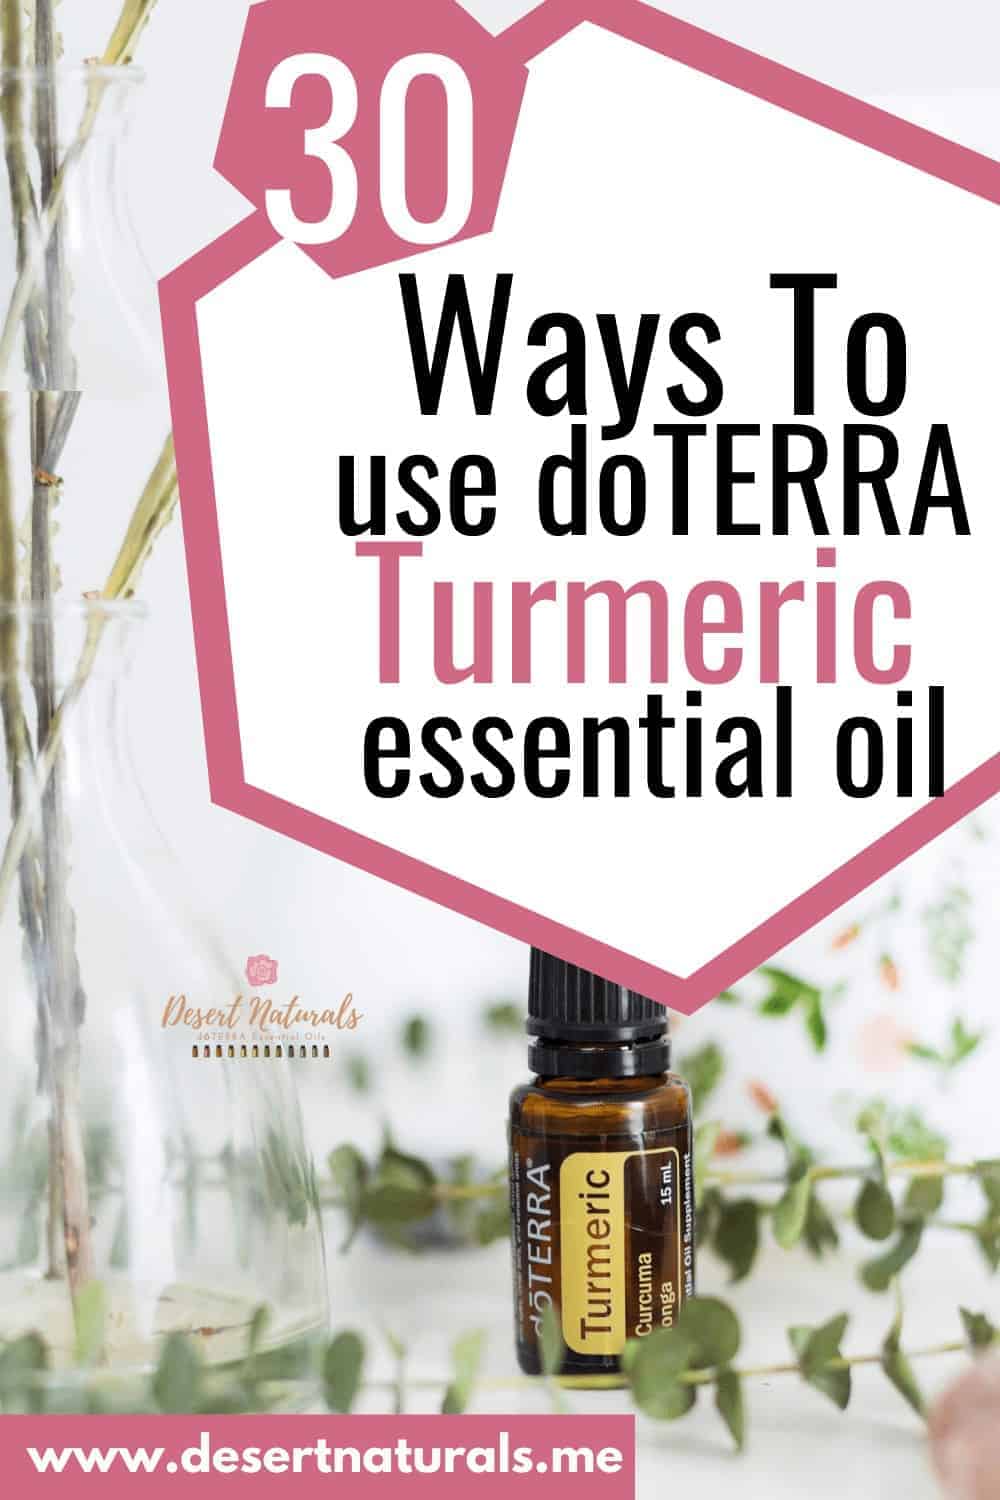 30 Benefits and Uses of doTERRA Turmeric Essential Oil